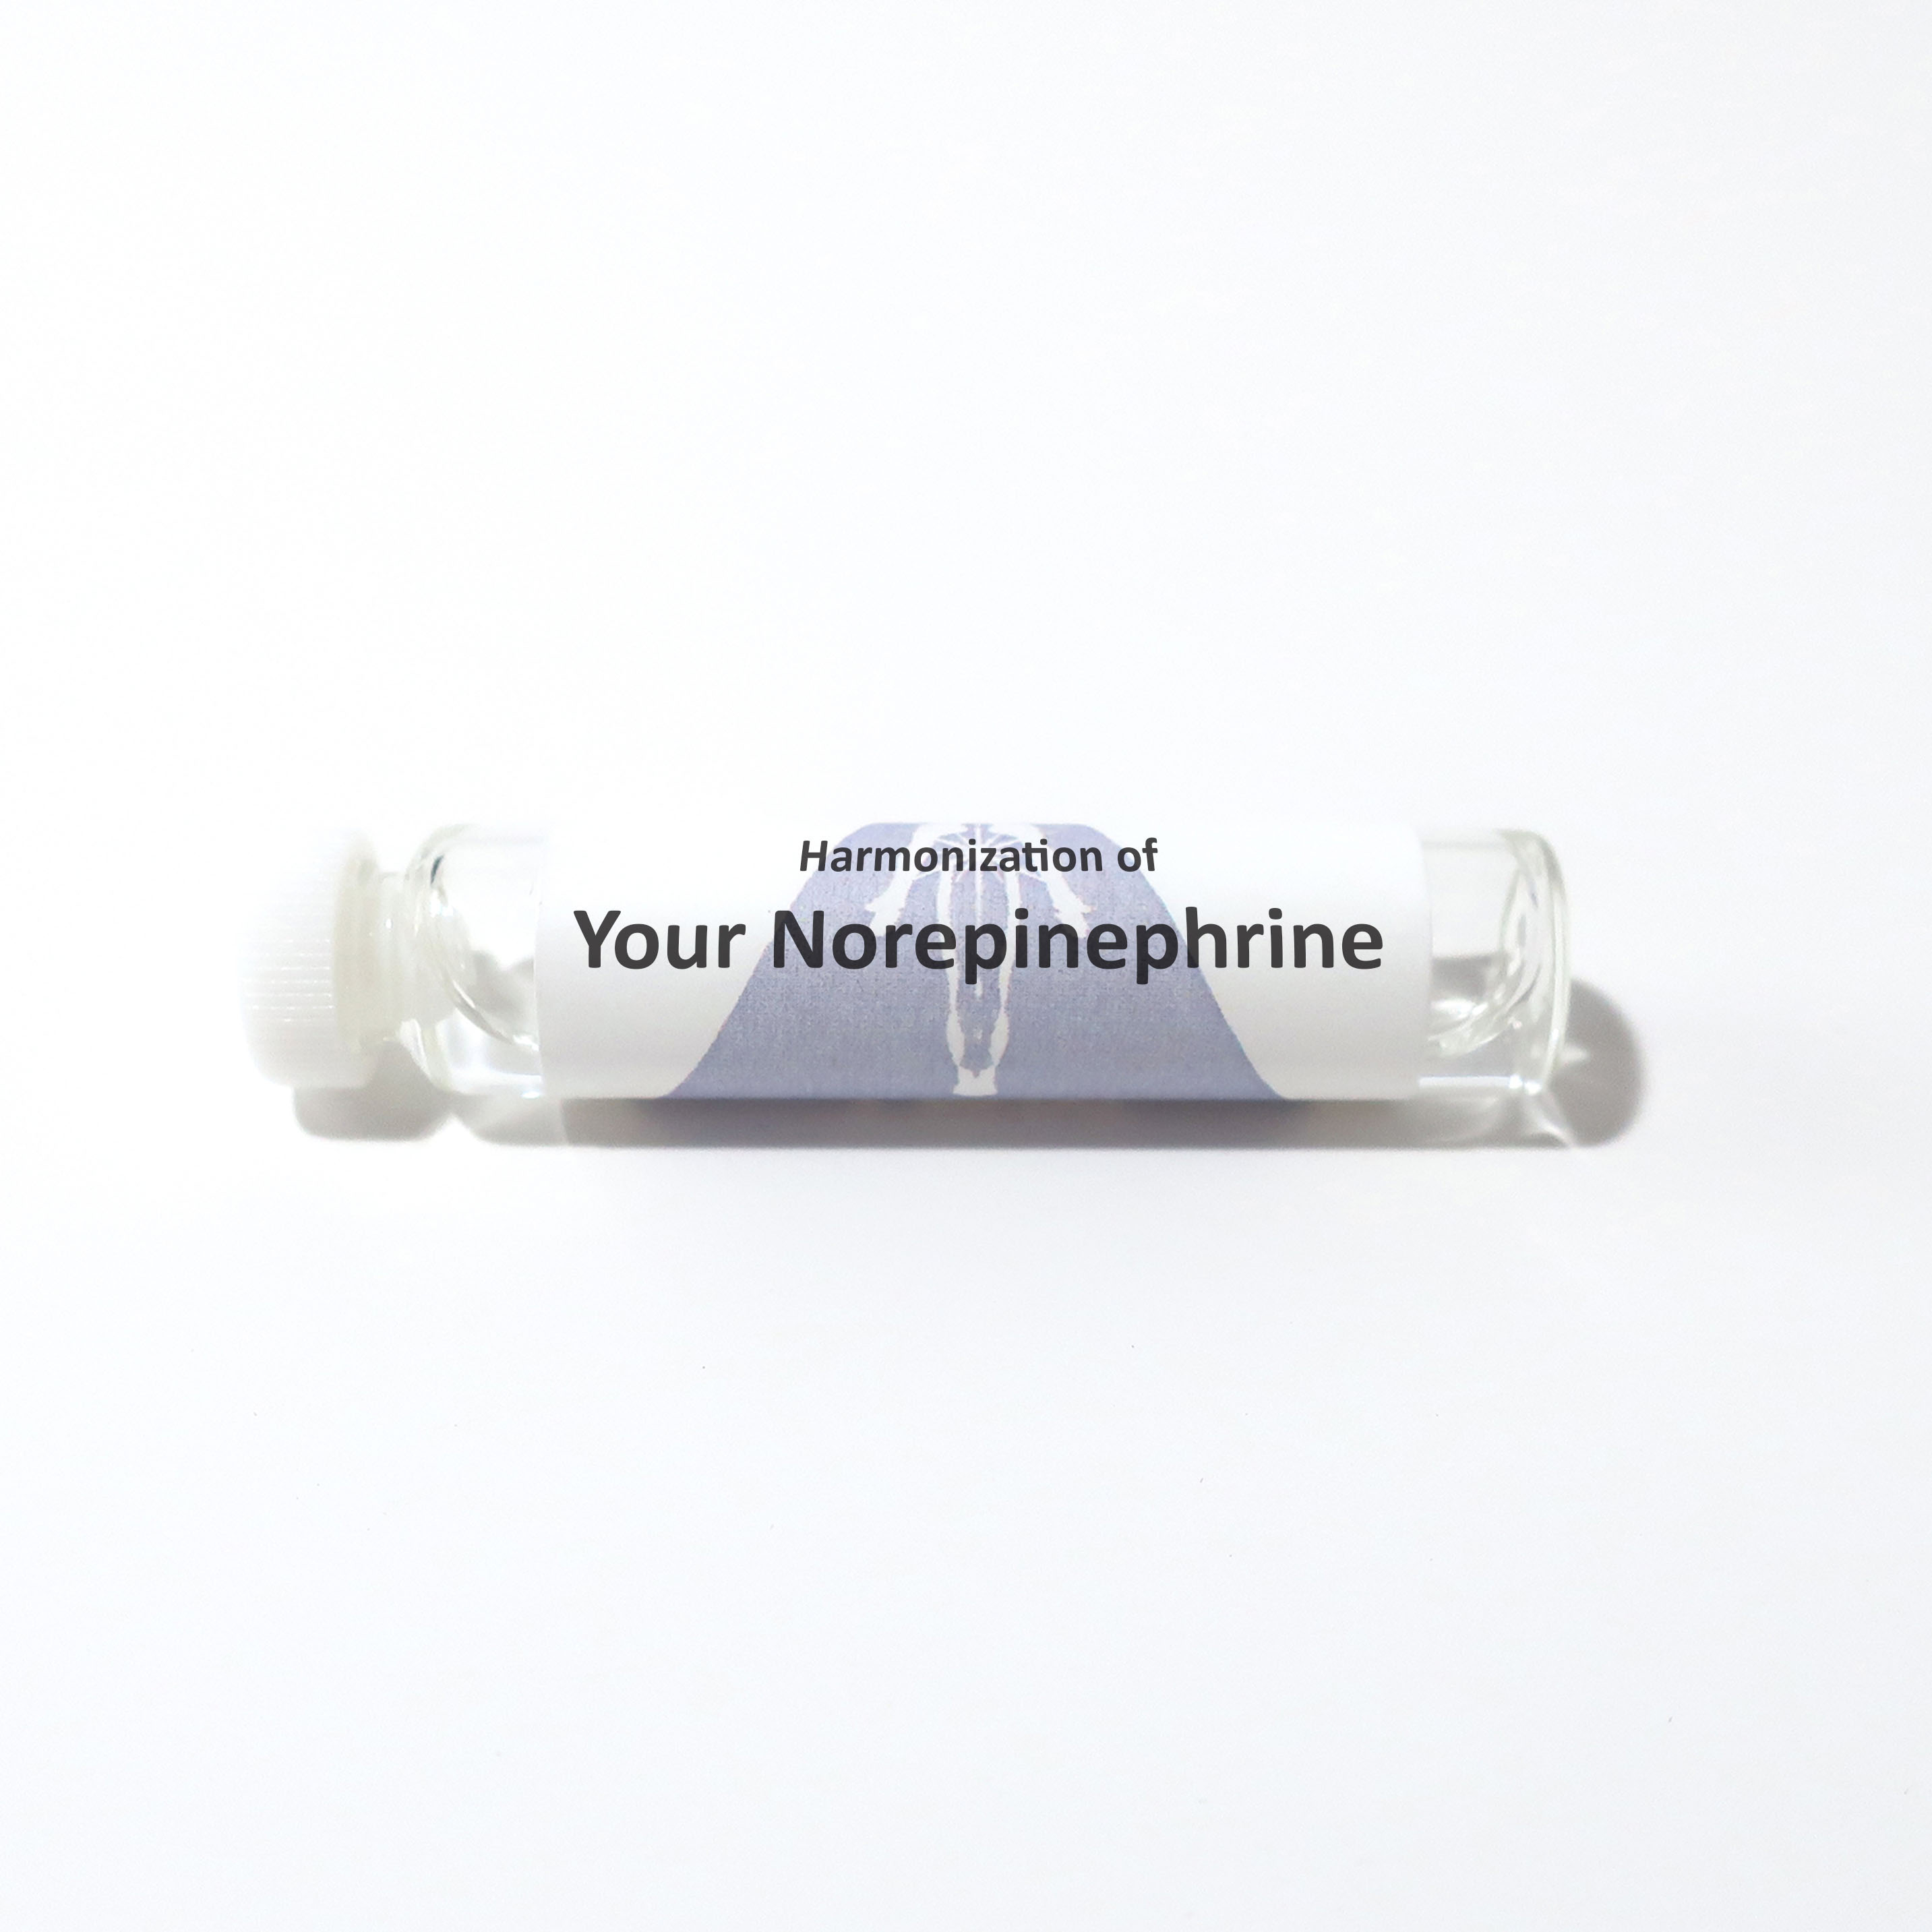 Your Norepinephrine